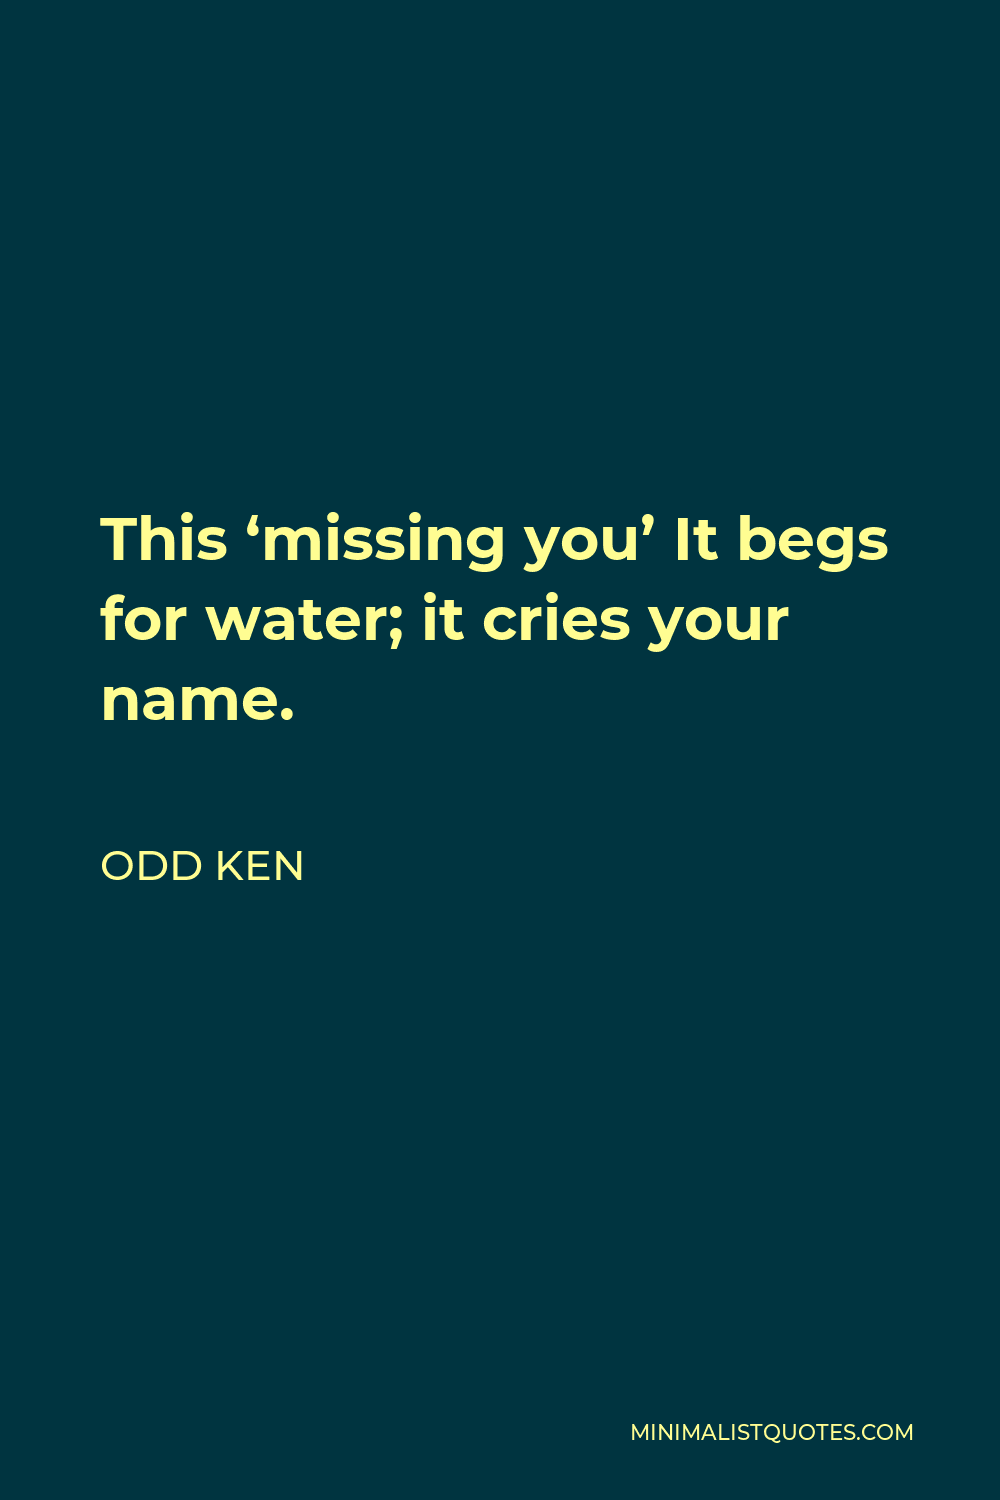 Odd Ken Quote - This ‘missing you’ It begs for water; it cries your name.